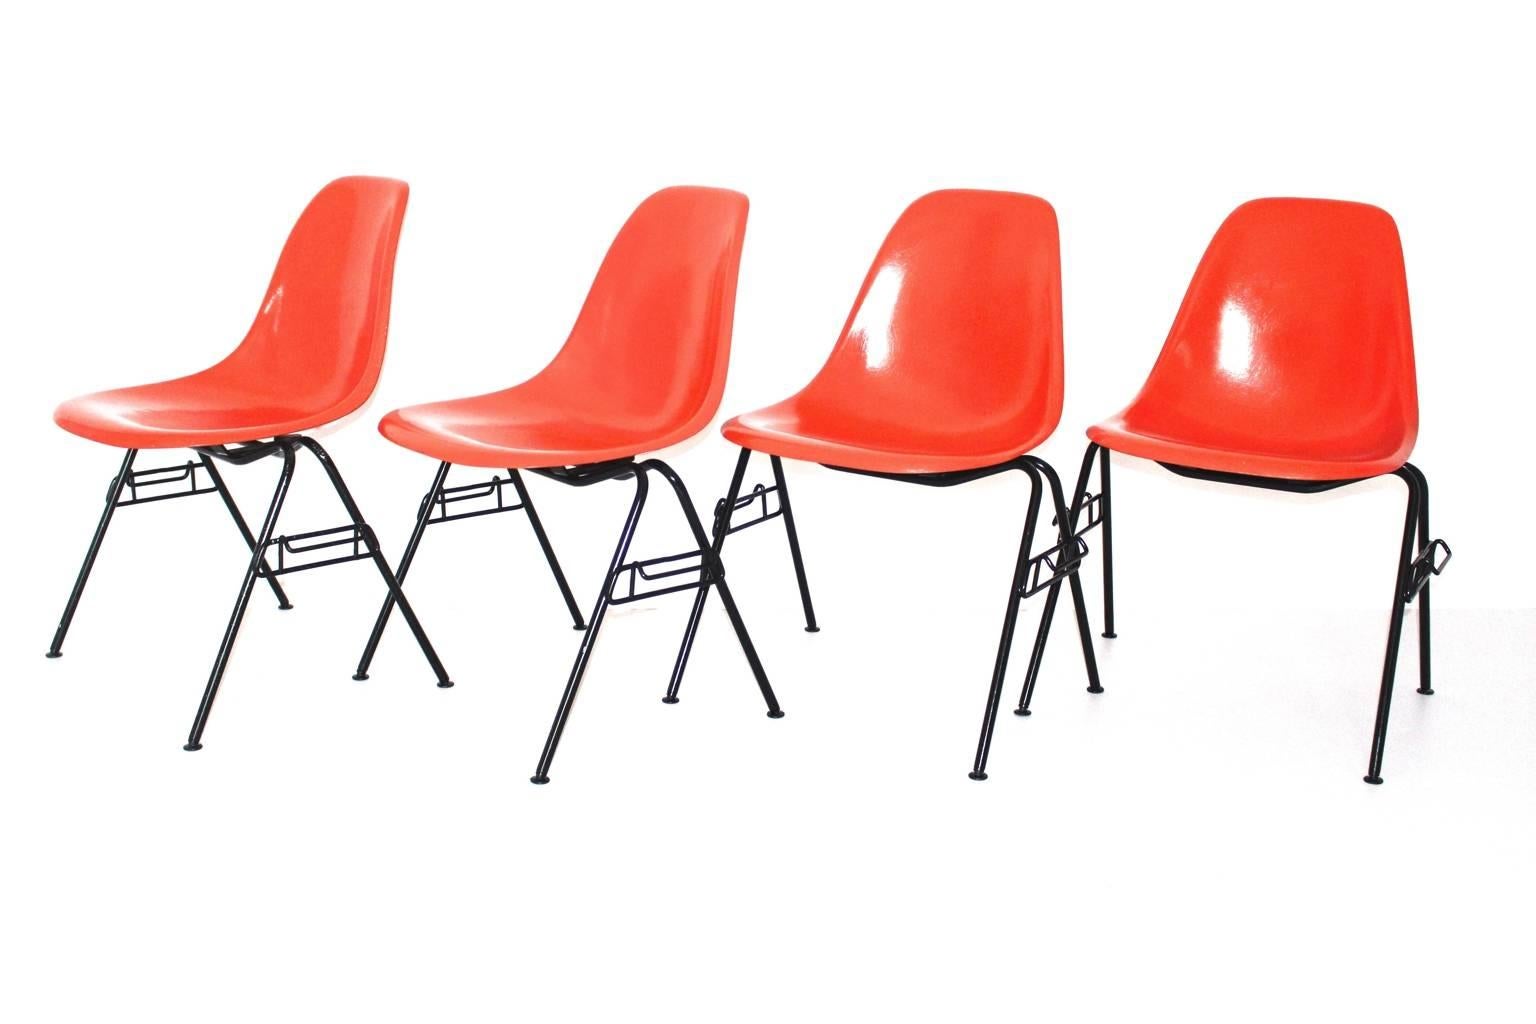 Mid century modern orange original vintage set of 4 dining chairs by Charles and Ray Eames 1950s.
The dining chair model name is Model DSS - N, which was designed by Ray and Charles Eames 1950s and produced by Hermann Miller, Zeeland, Michigan,